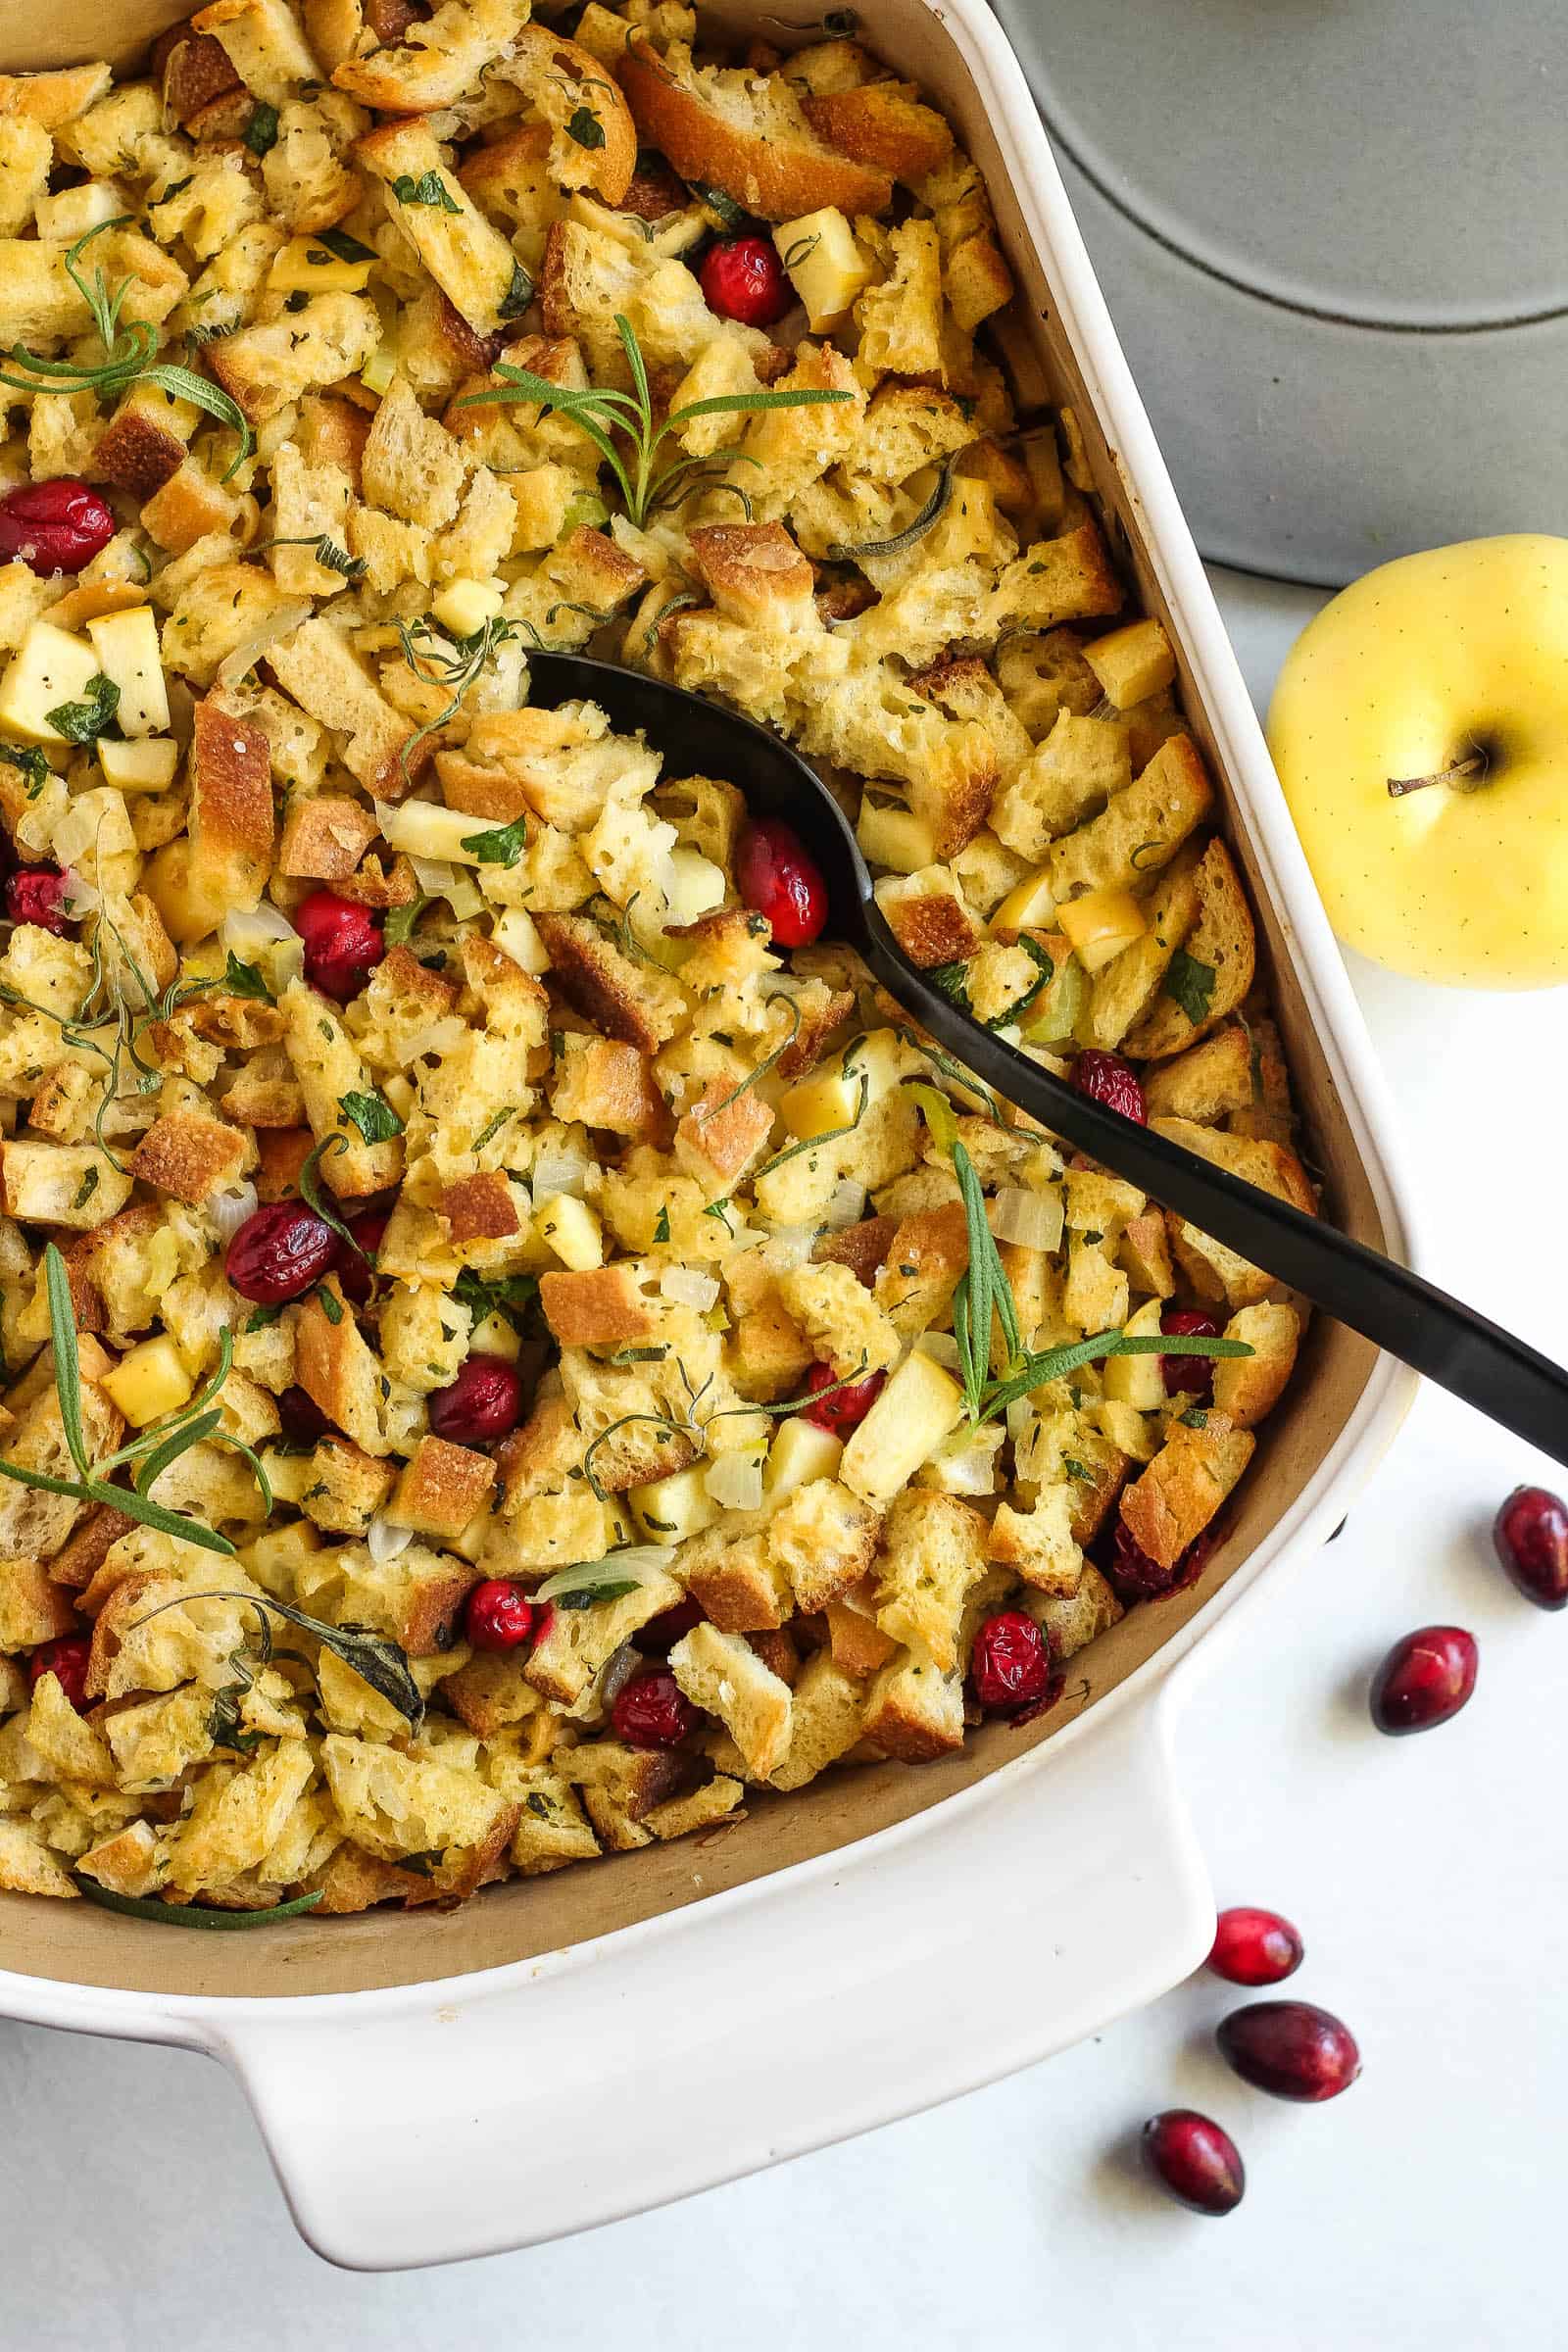 This Apple Cranberry Holiday Stuffing is a delicious Arctic apples recipe for the holidays. Pack in the flavor for an easy vegetarian holiday side dish | Street Smart Nutrition